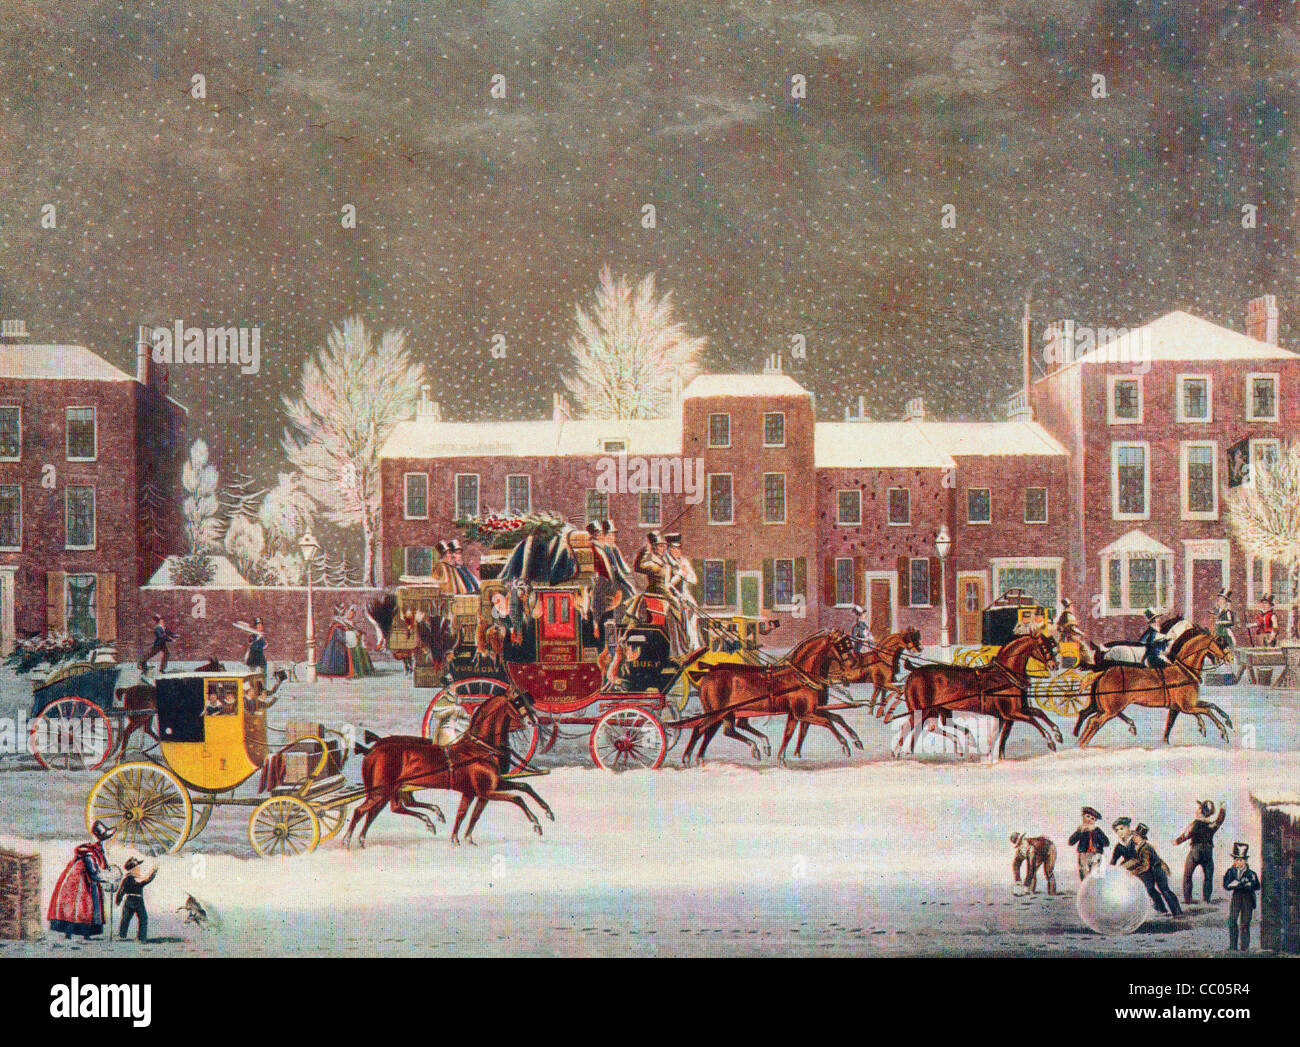 Approach to Christmas - Vintage Snow scene Stock Photo